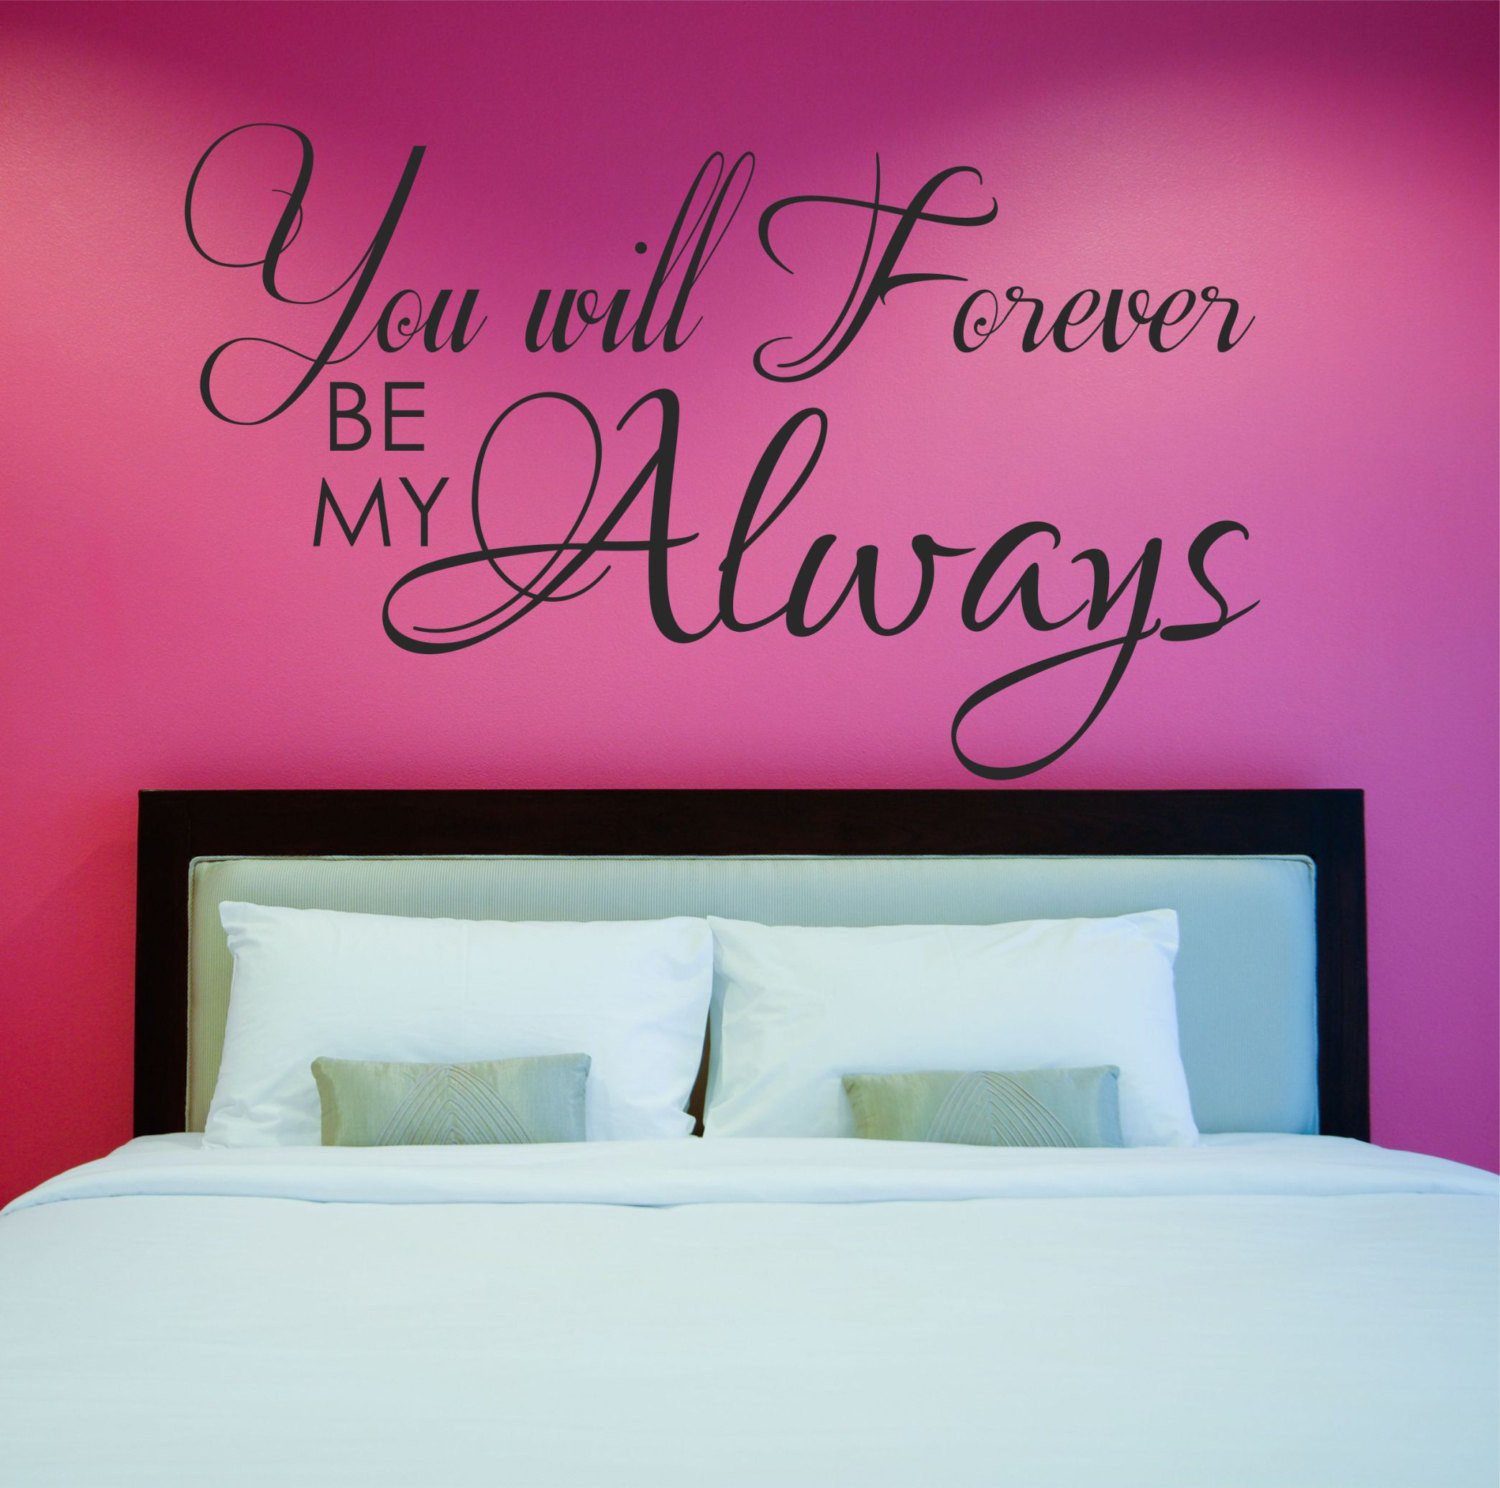 Wall Decal Quotes For Bedroom
 Love Quote Decal Master Bedroom Wall Decal Vinyl Wall Quote